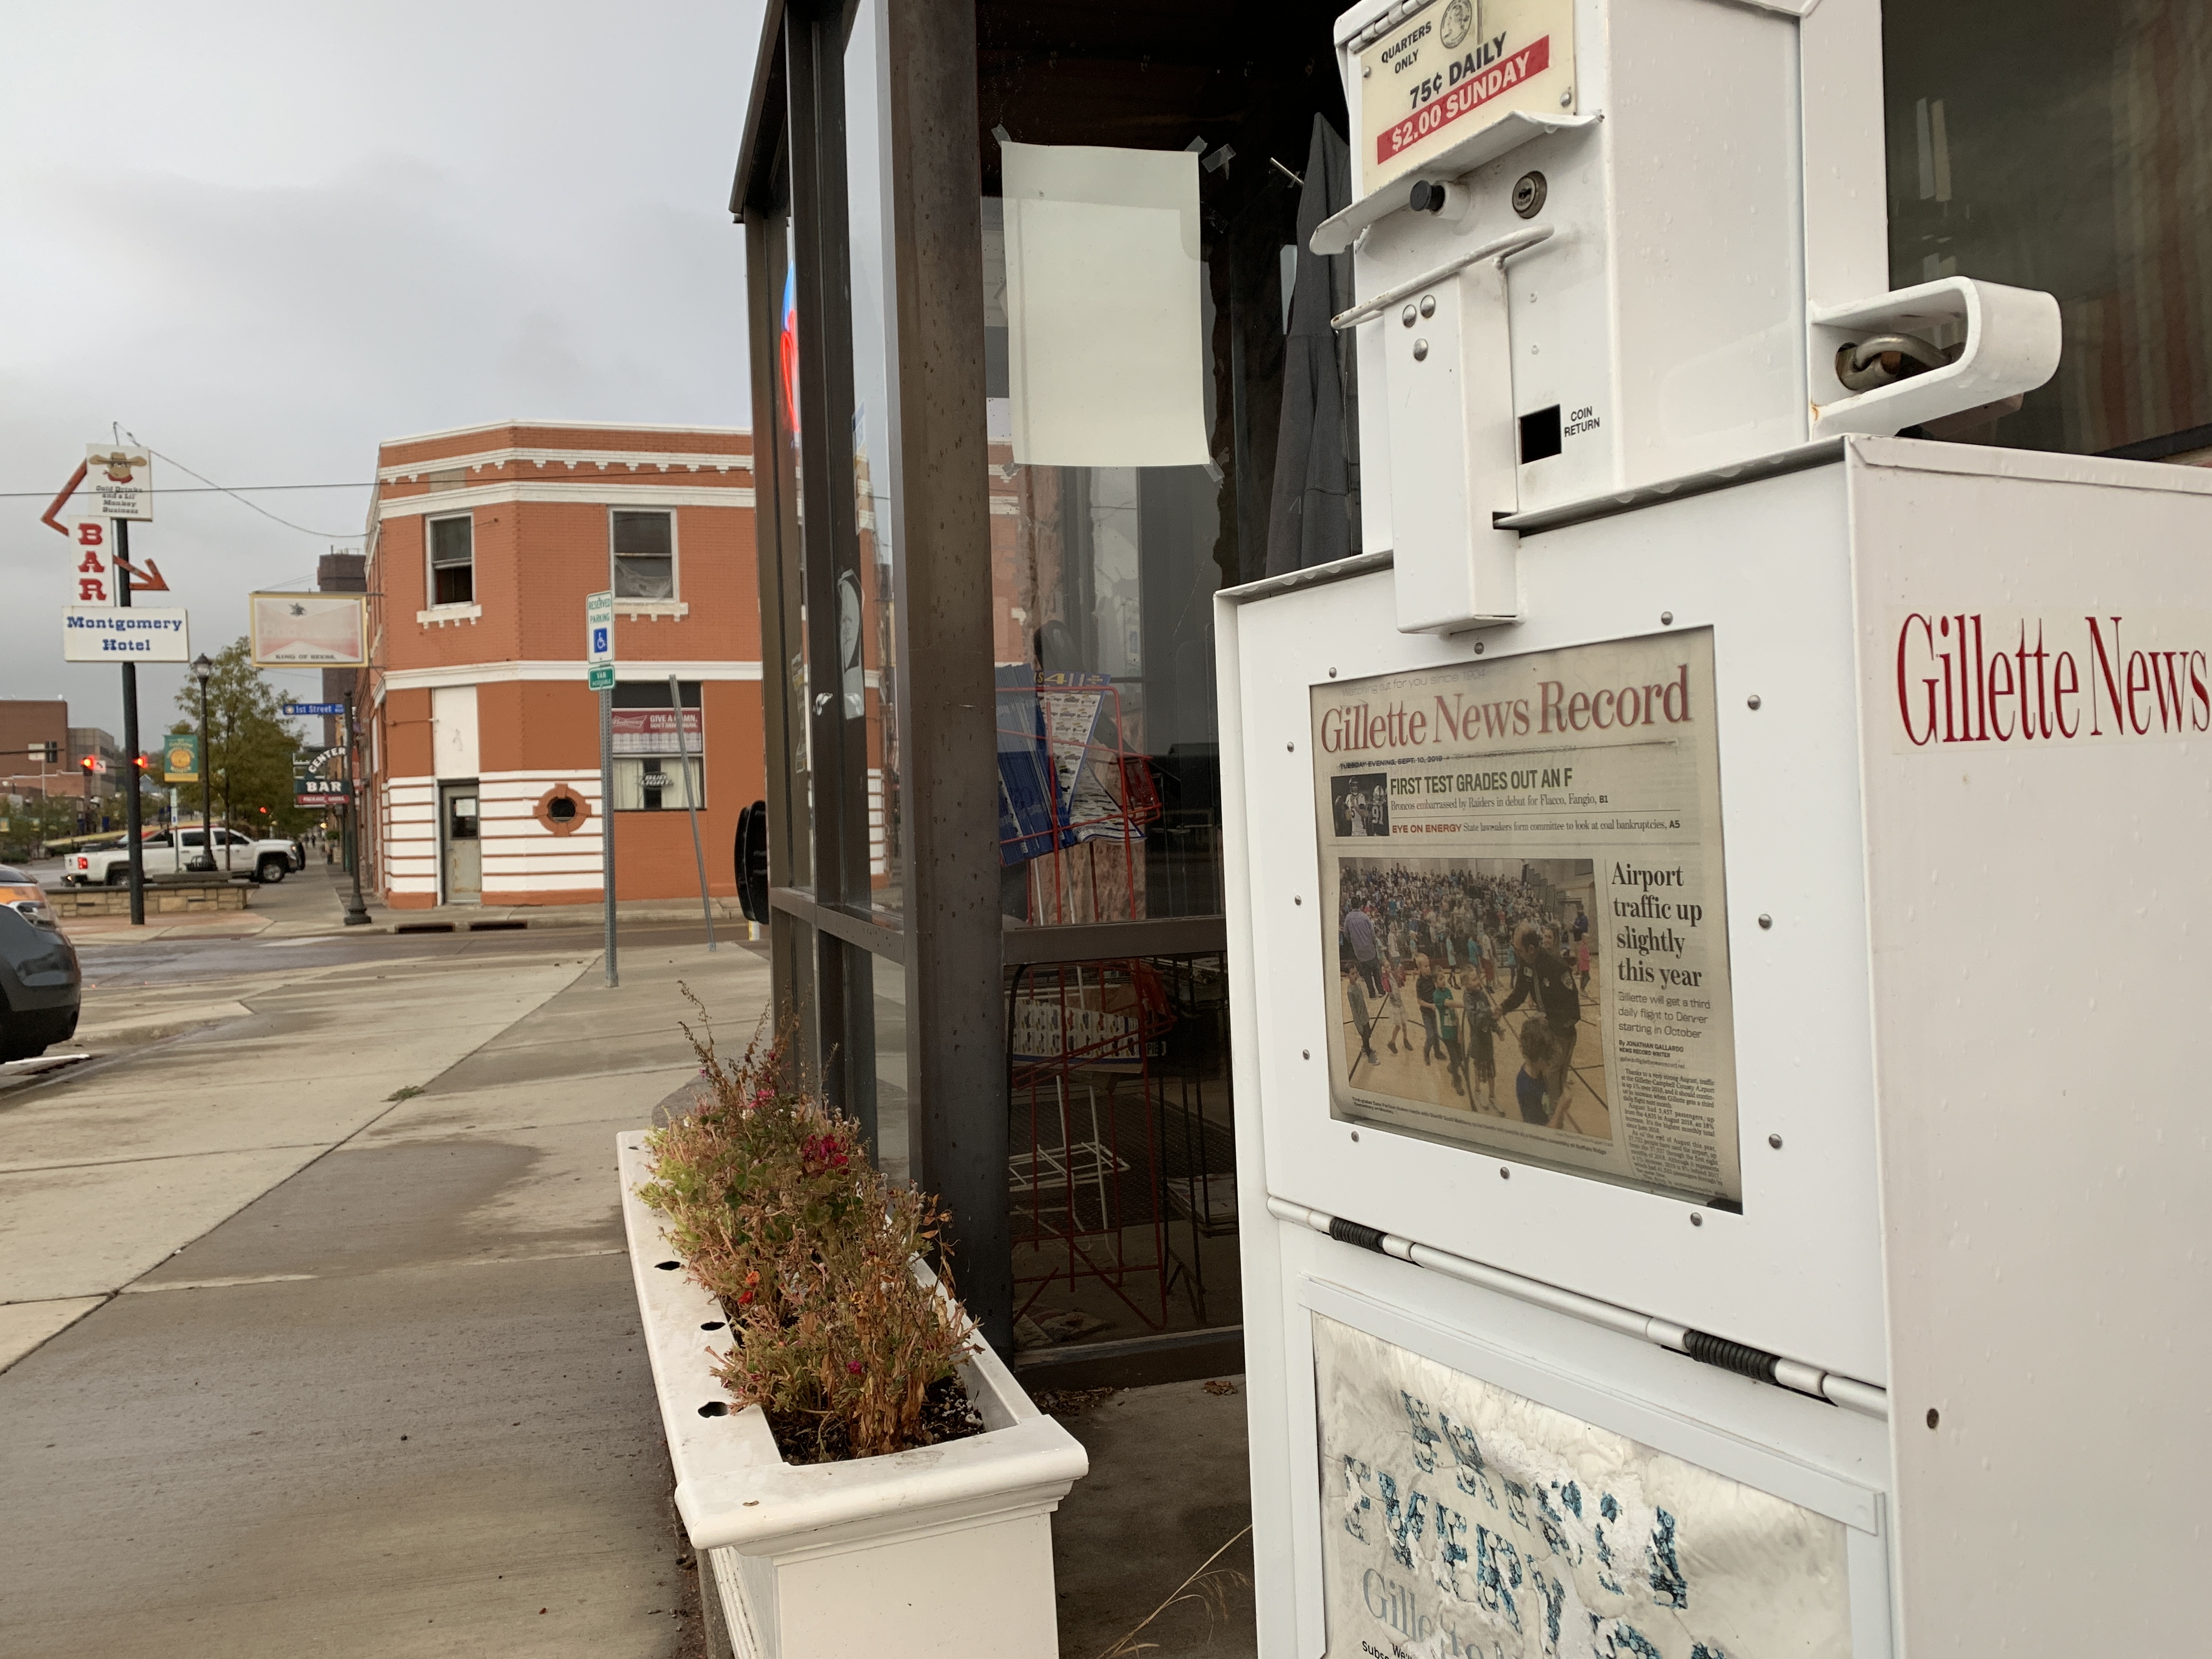 A newspaper box sits outside Lula Belle’s Cafe in downtown Gillette, Wyoming. The box containing copies of the local paper, the Gillette News Record, is the only vending machine left standing outside the popular breakfast eatery